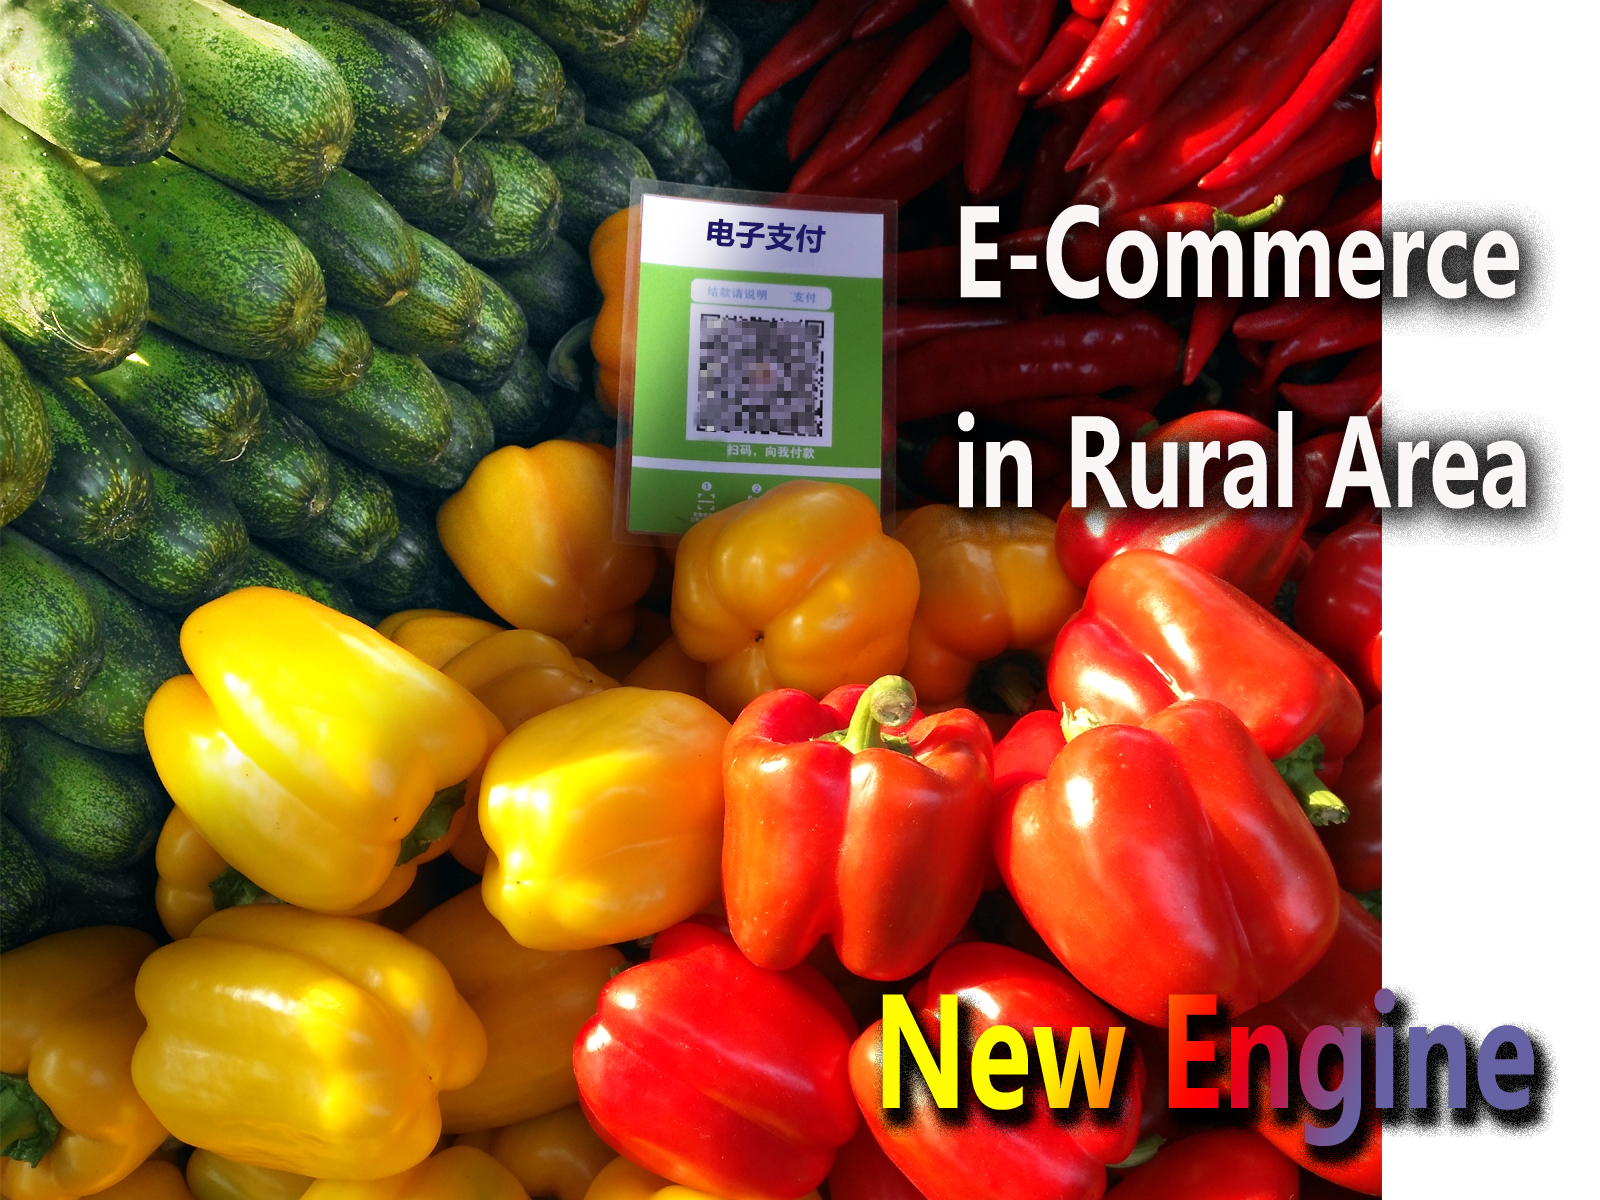 Government-backed E-Commerce in Rural Areas: A New Engine for Economic Development